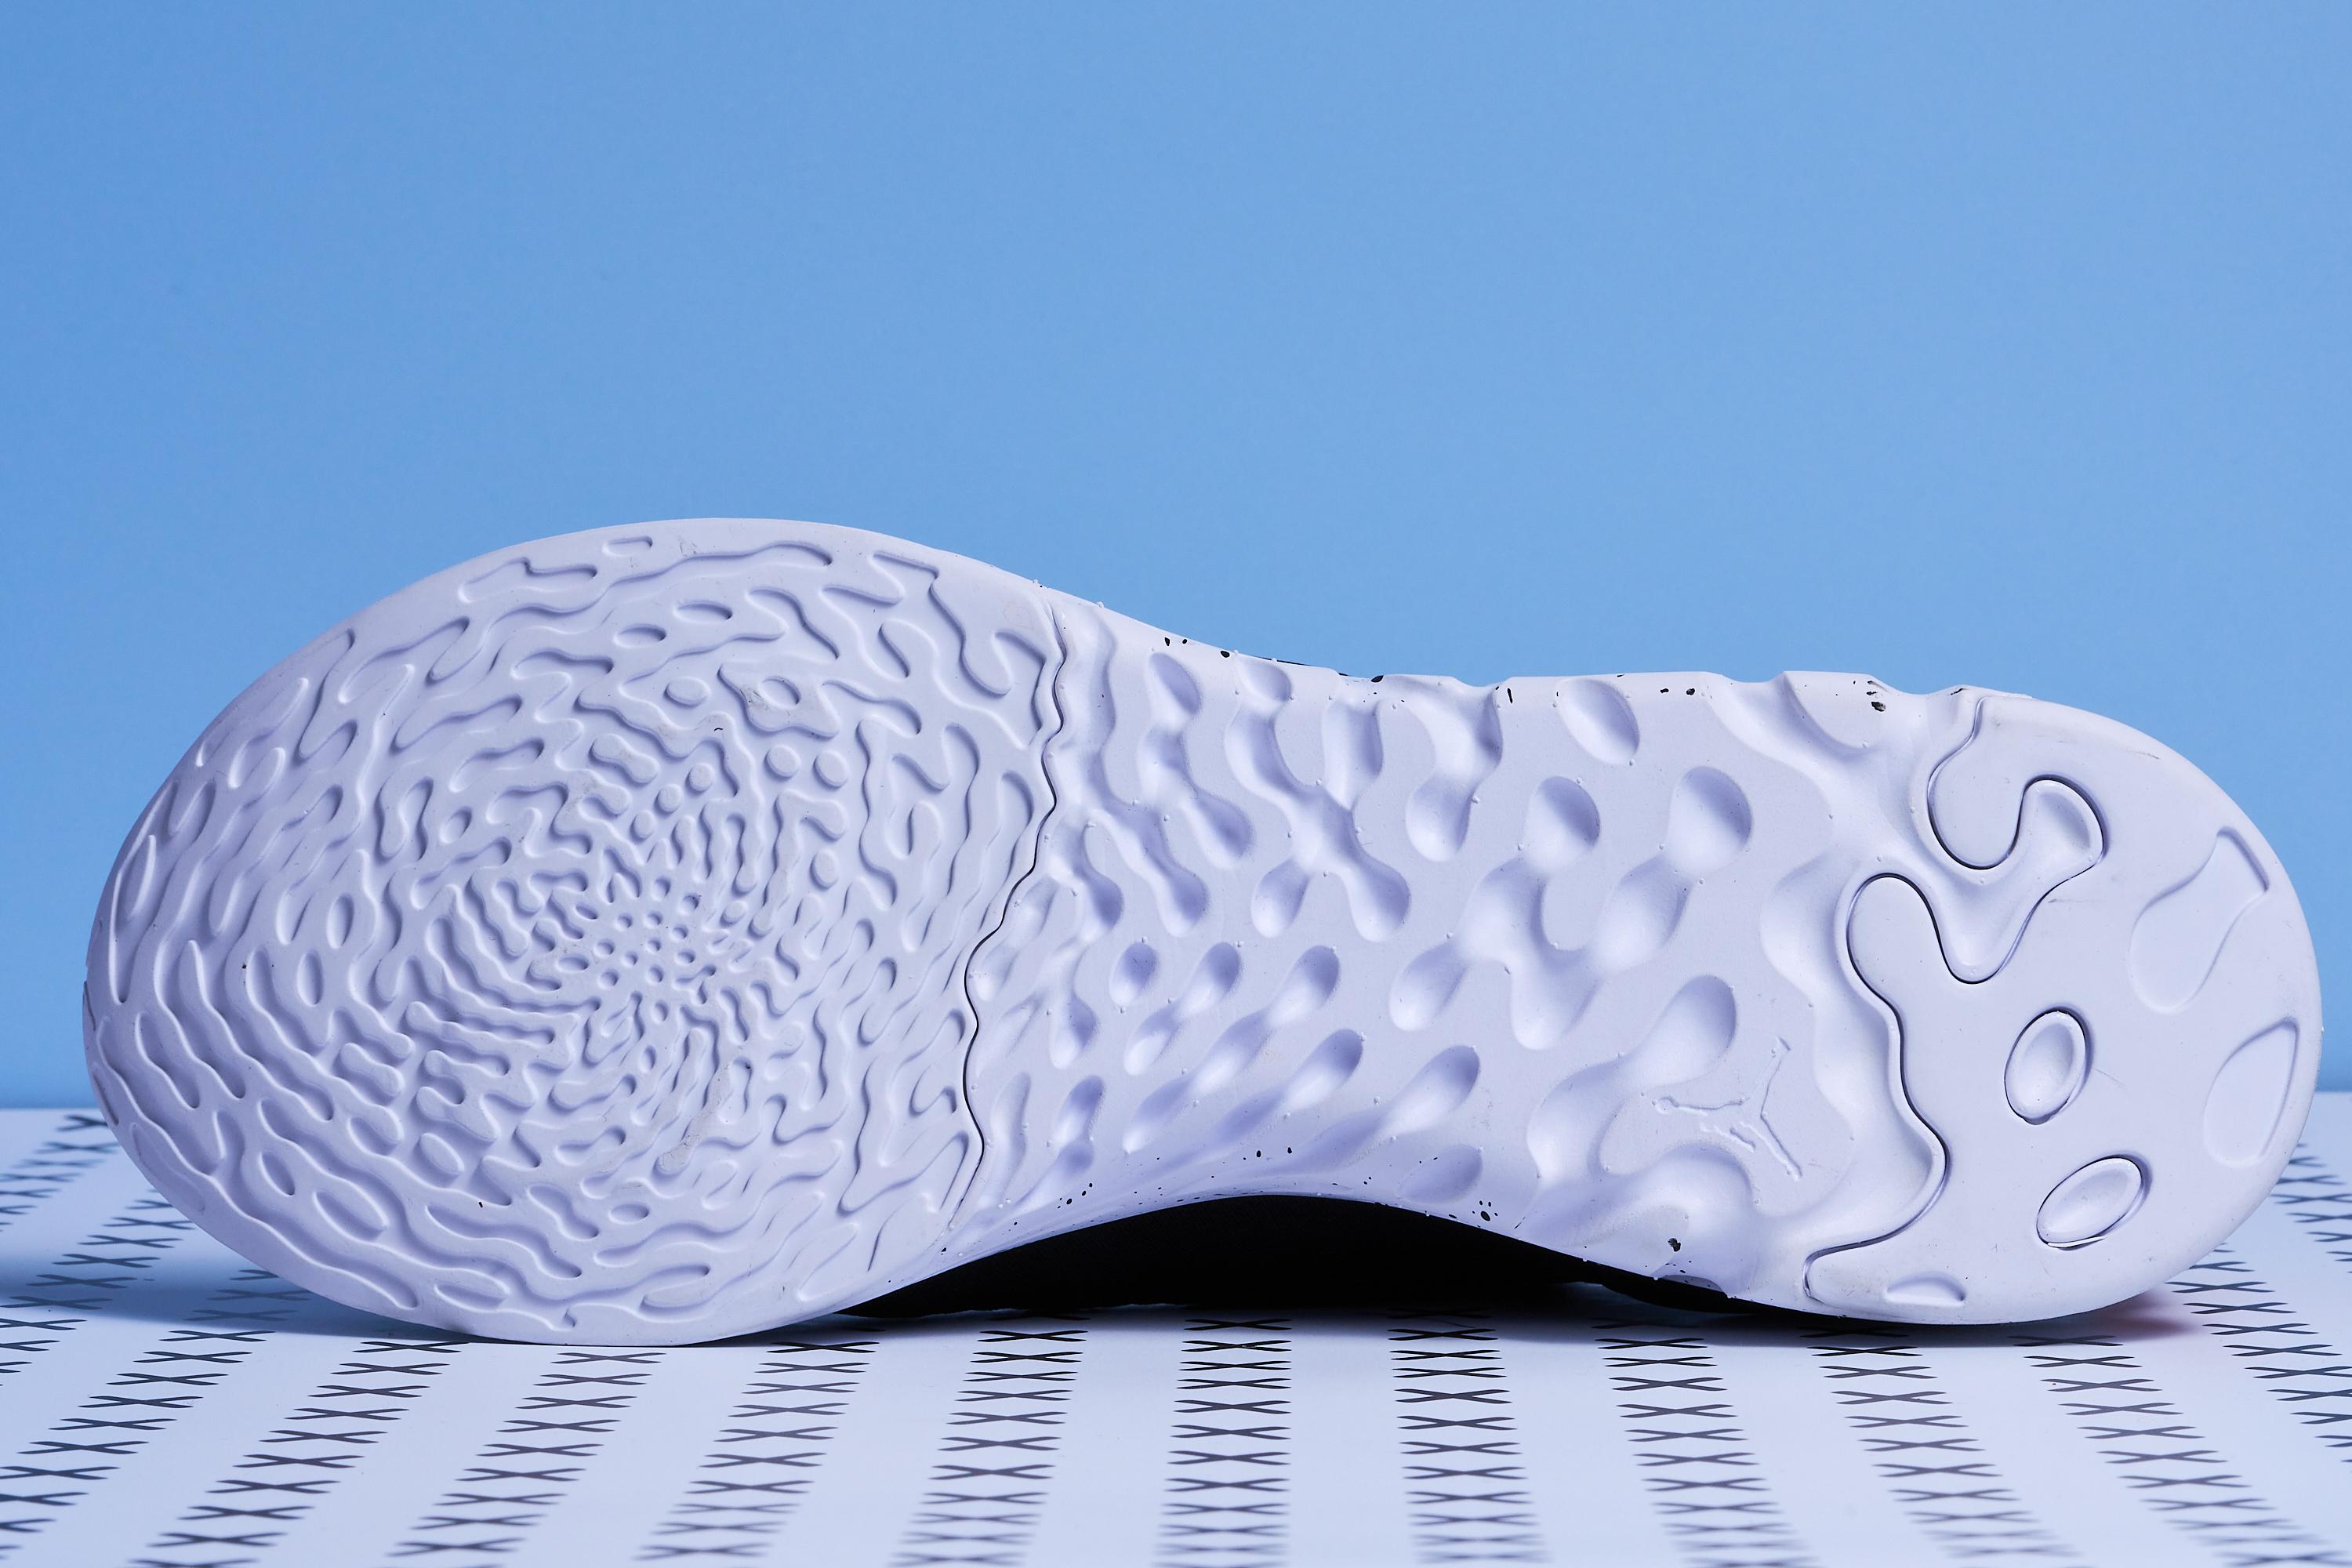 HealthdesignShops | Nike unveils official photos of the Year of the ...